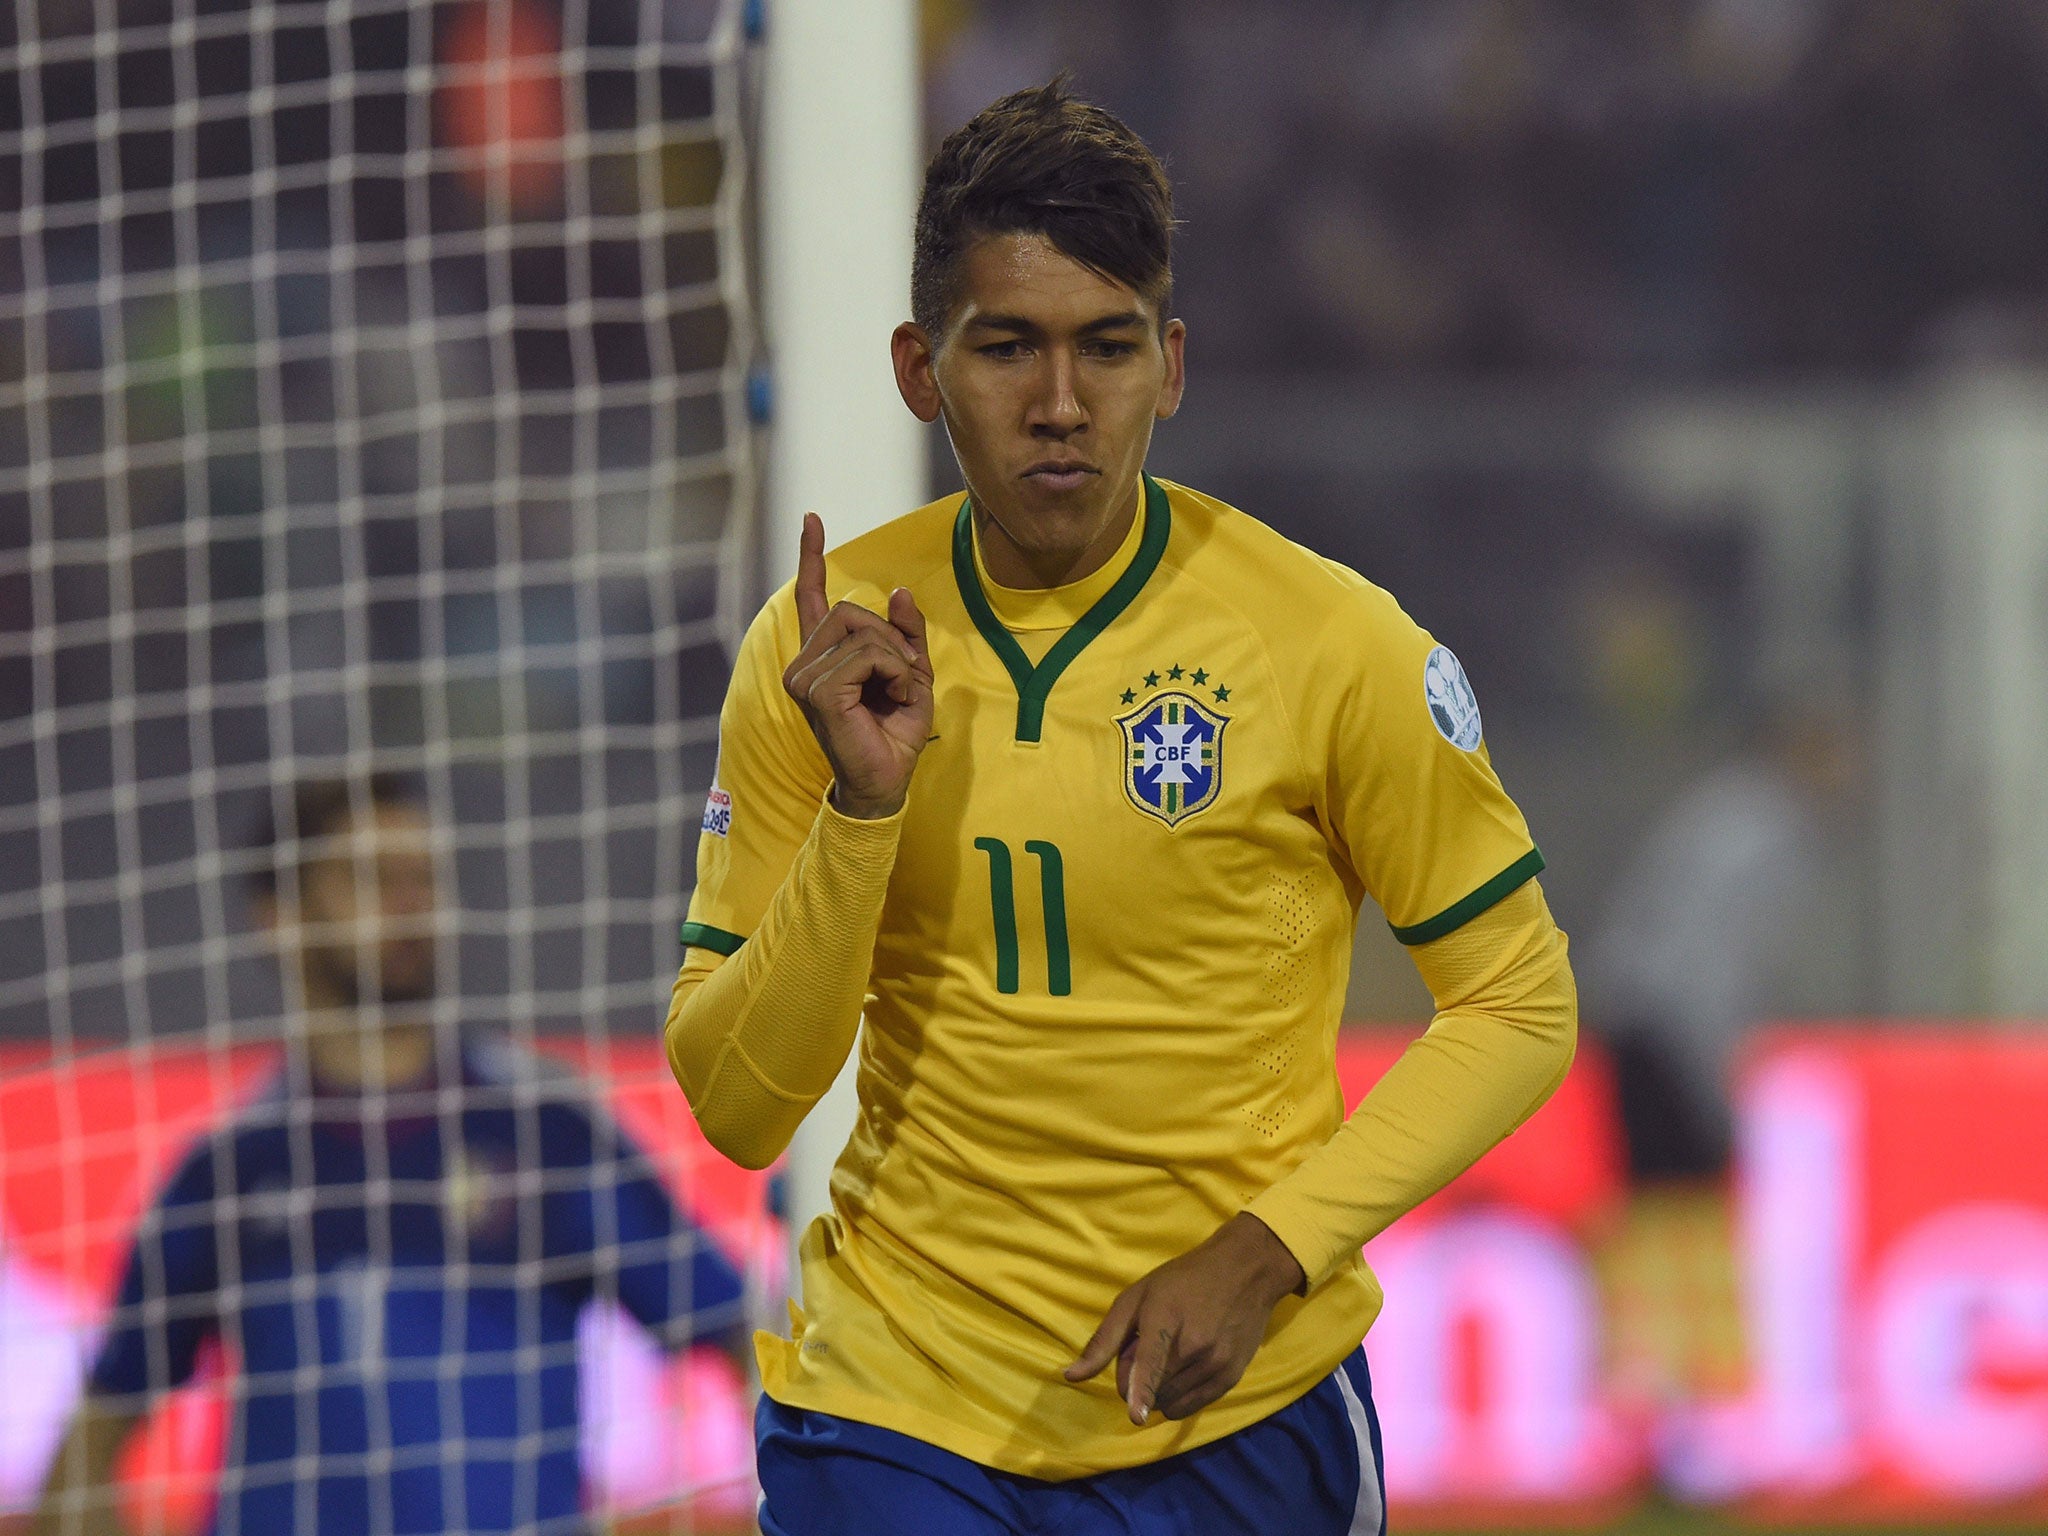 Brazil striker Roberto Firmino is reported to be close to a move to Liverpool